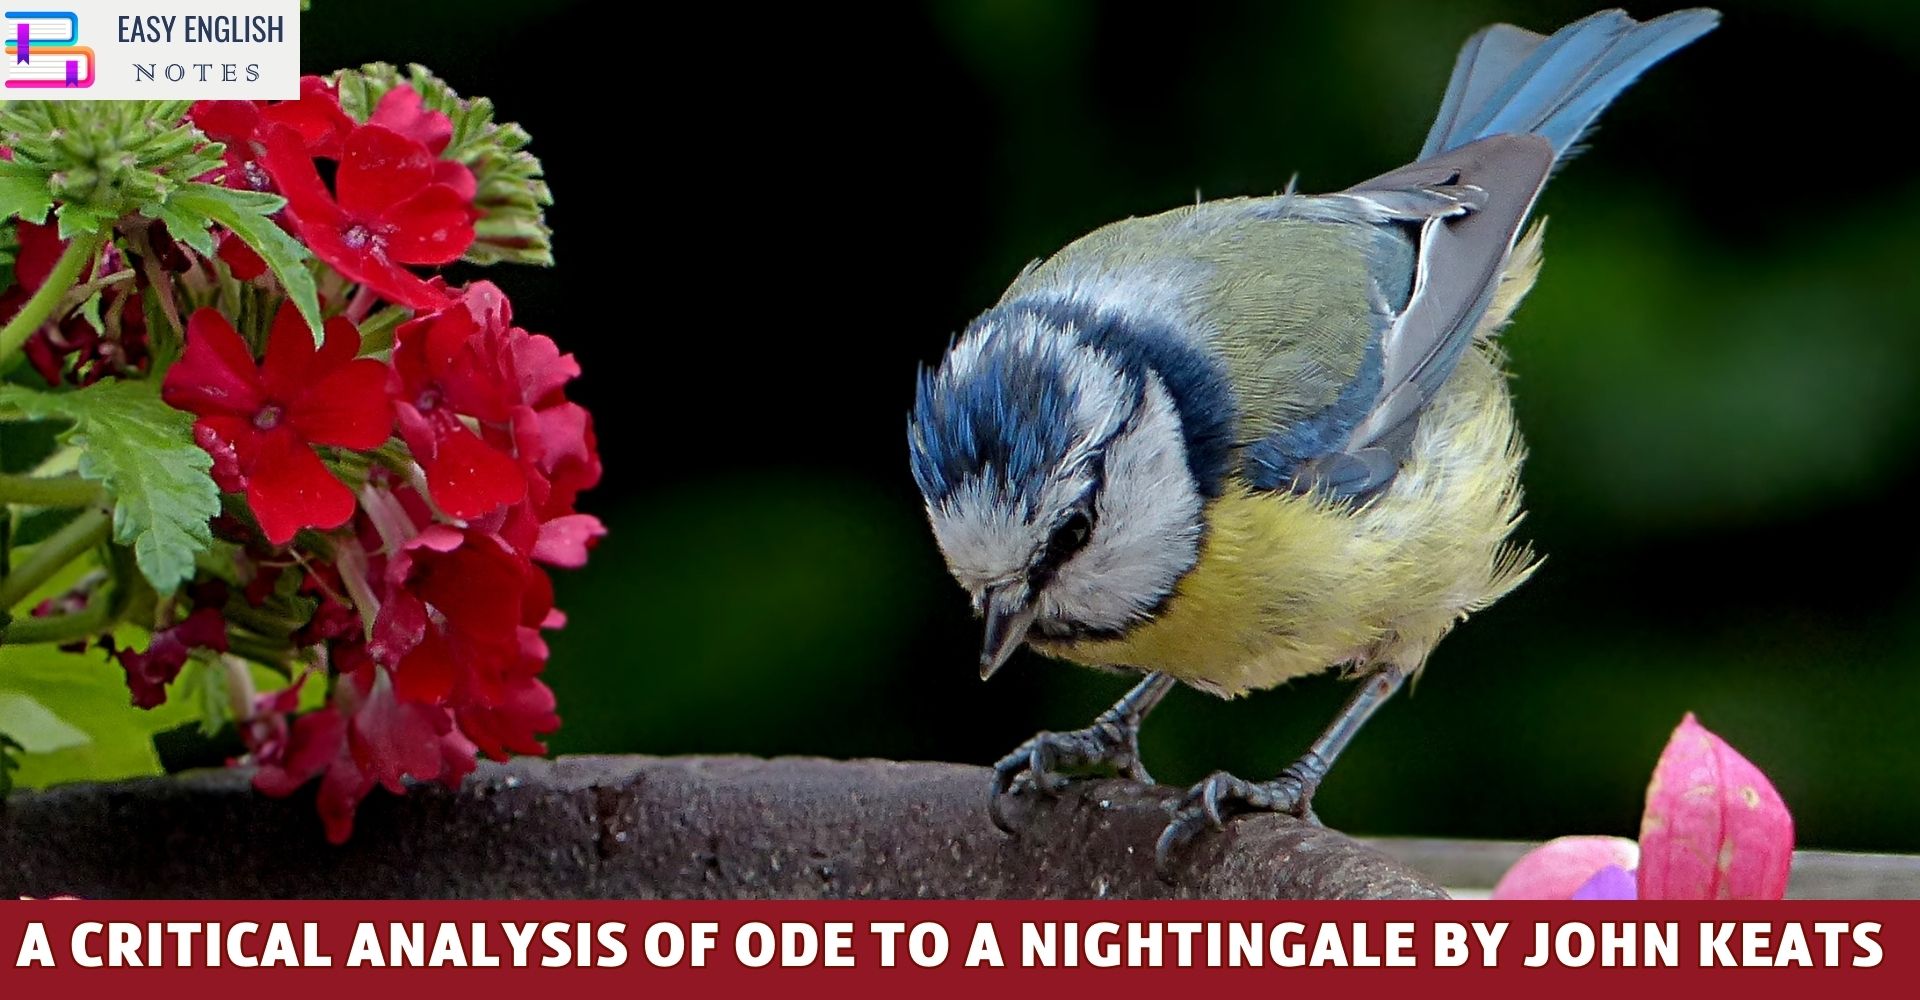 A Critical Analysis Of Ode to a Nightingale By John Keats